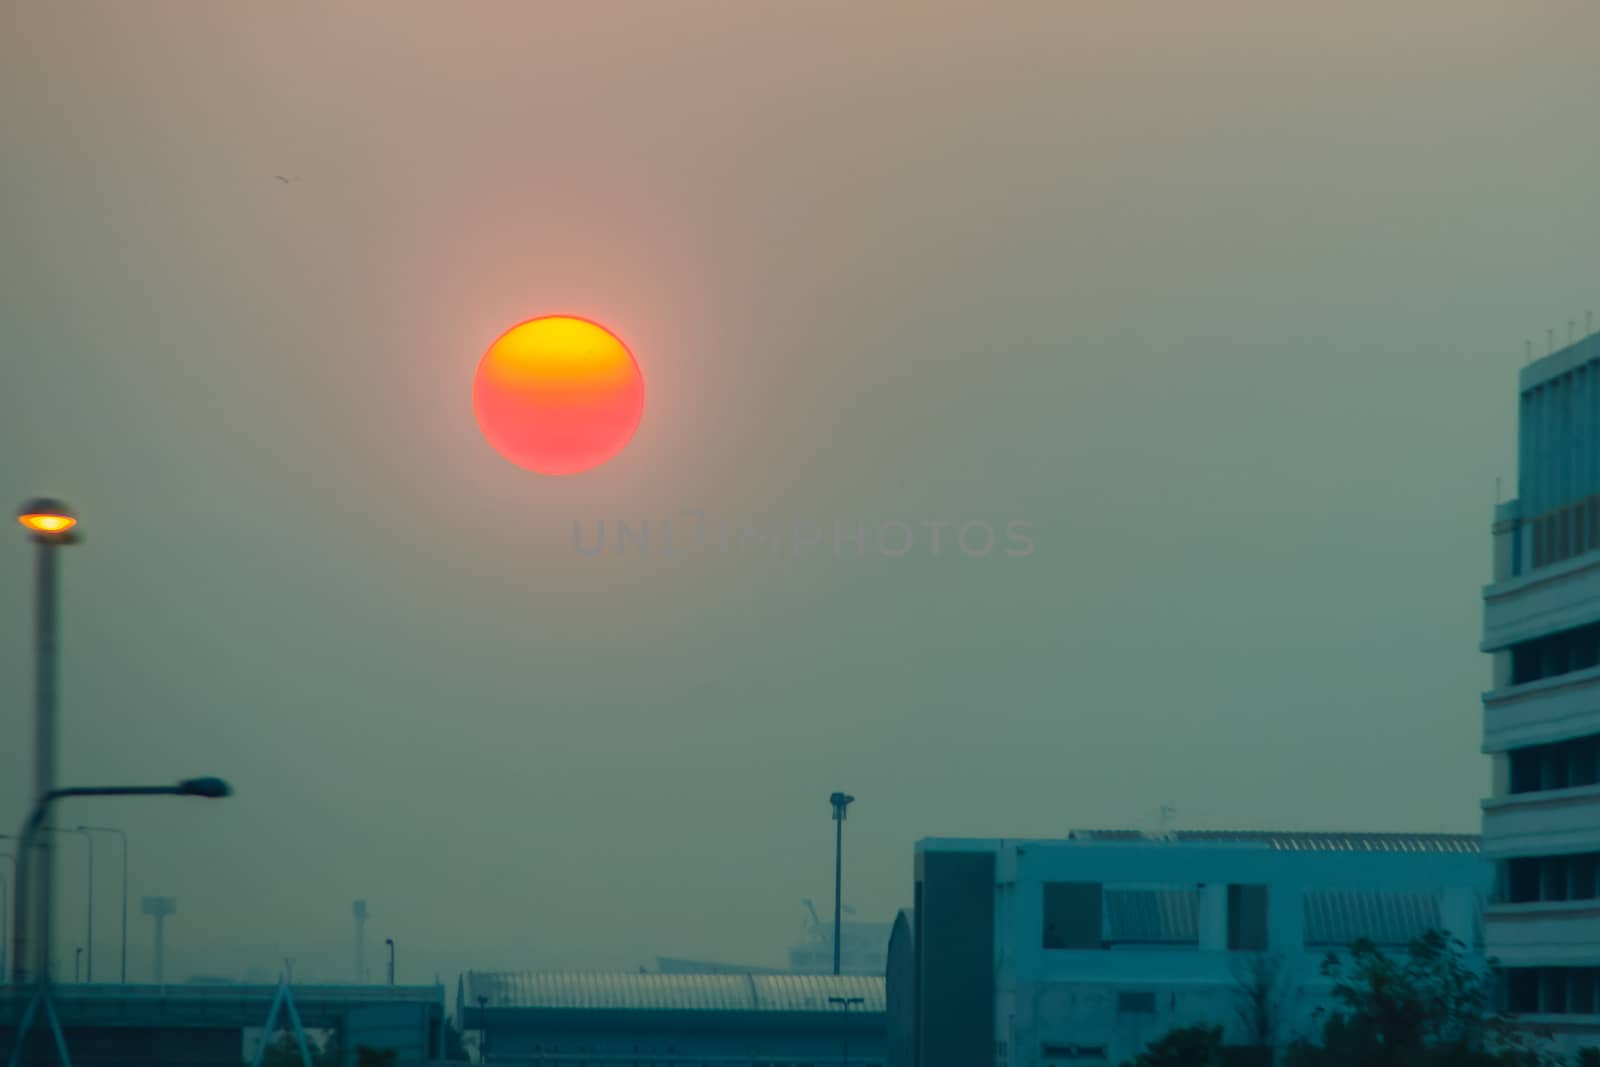 Beautiful Nature Egg Yolk Sunrise with colourful sky environment. Sun egg yolk, beautiful calm sky with orange sunrise in the morning at the airport. Morning sun egg yolk with silhouette background.